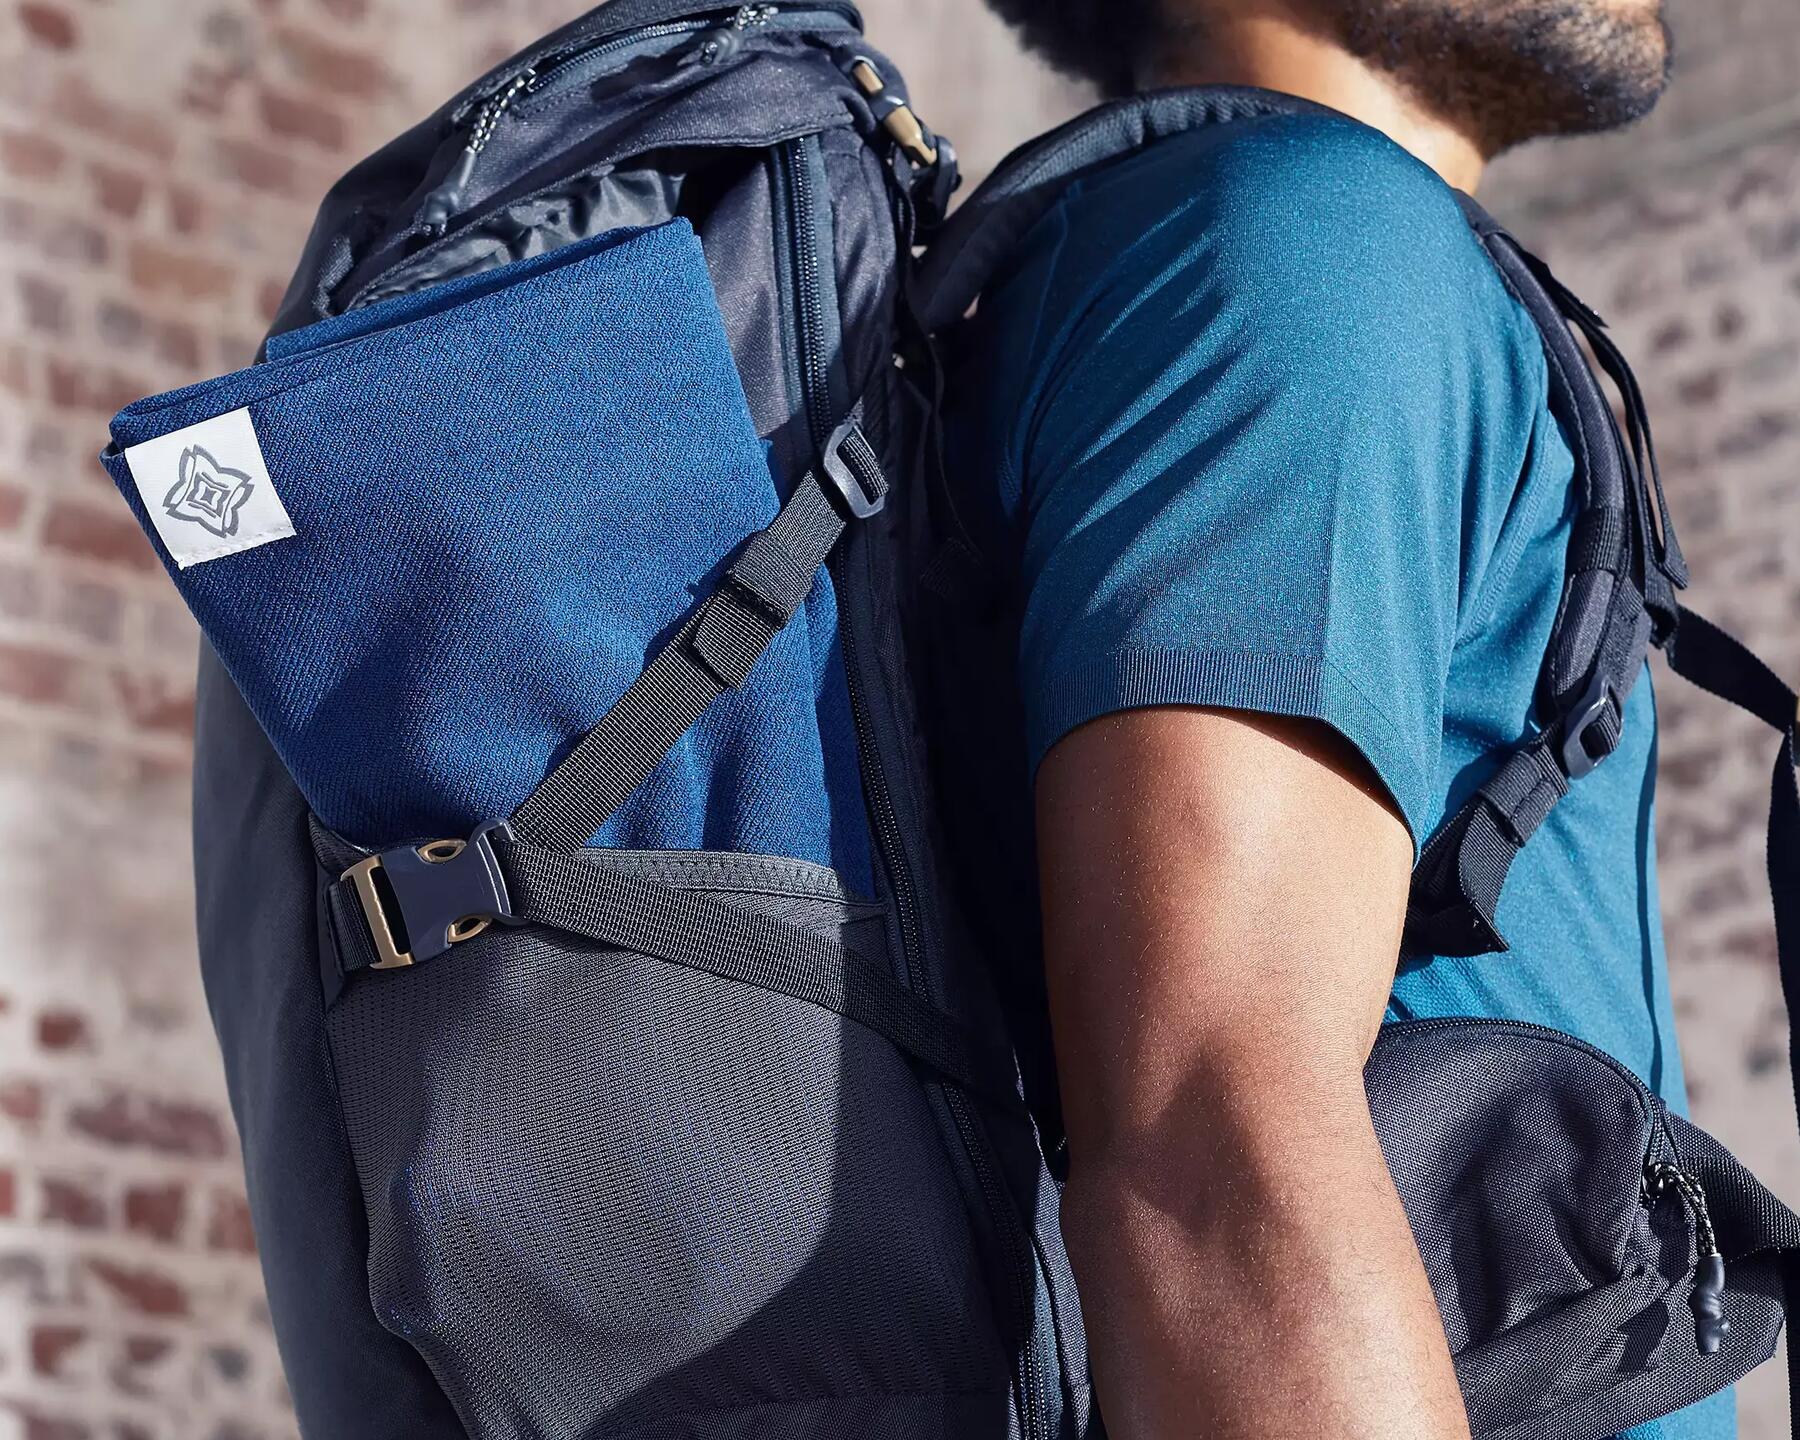 A man with a backpack and a Yoga Towel packed on the side of the backpack.